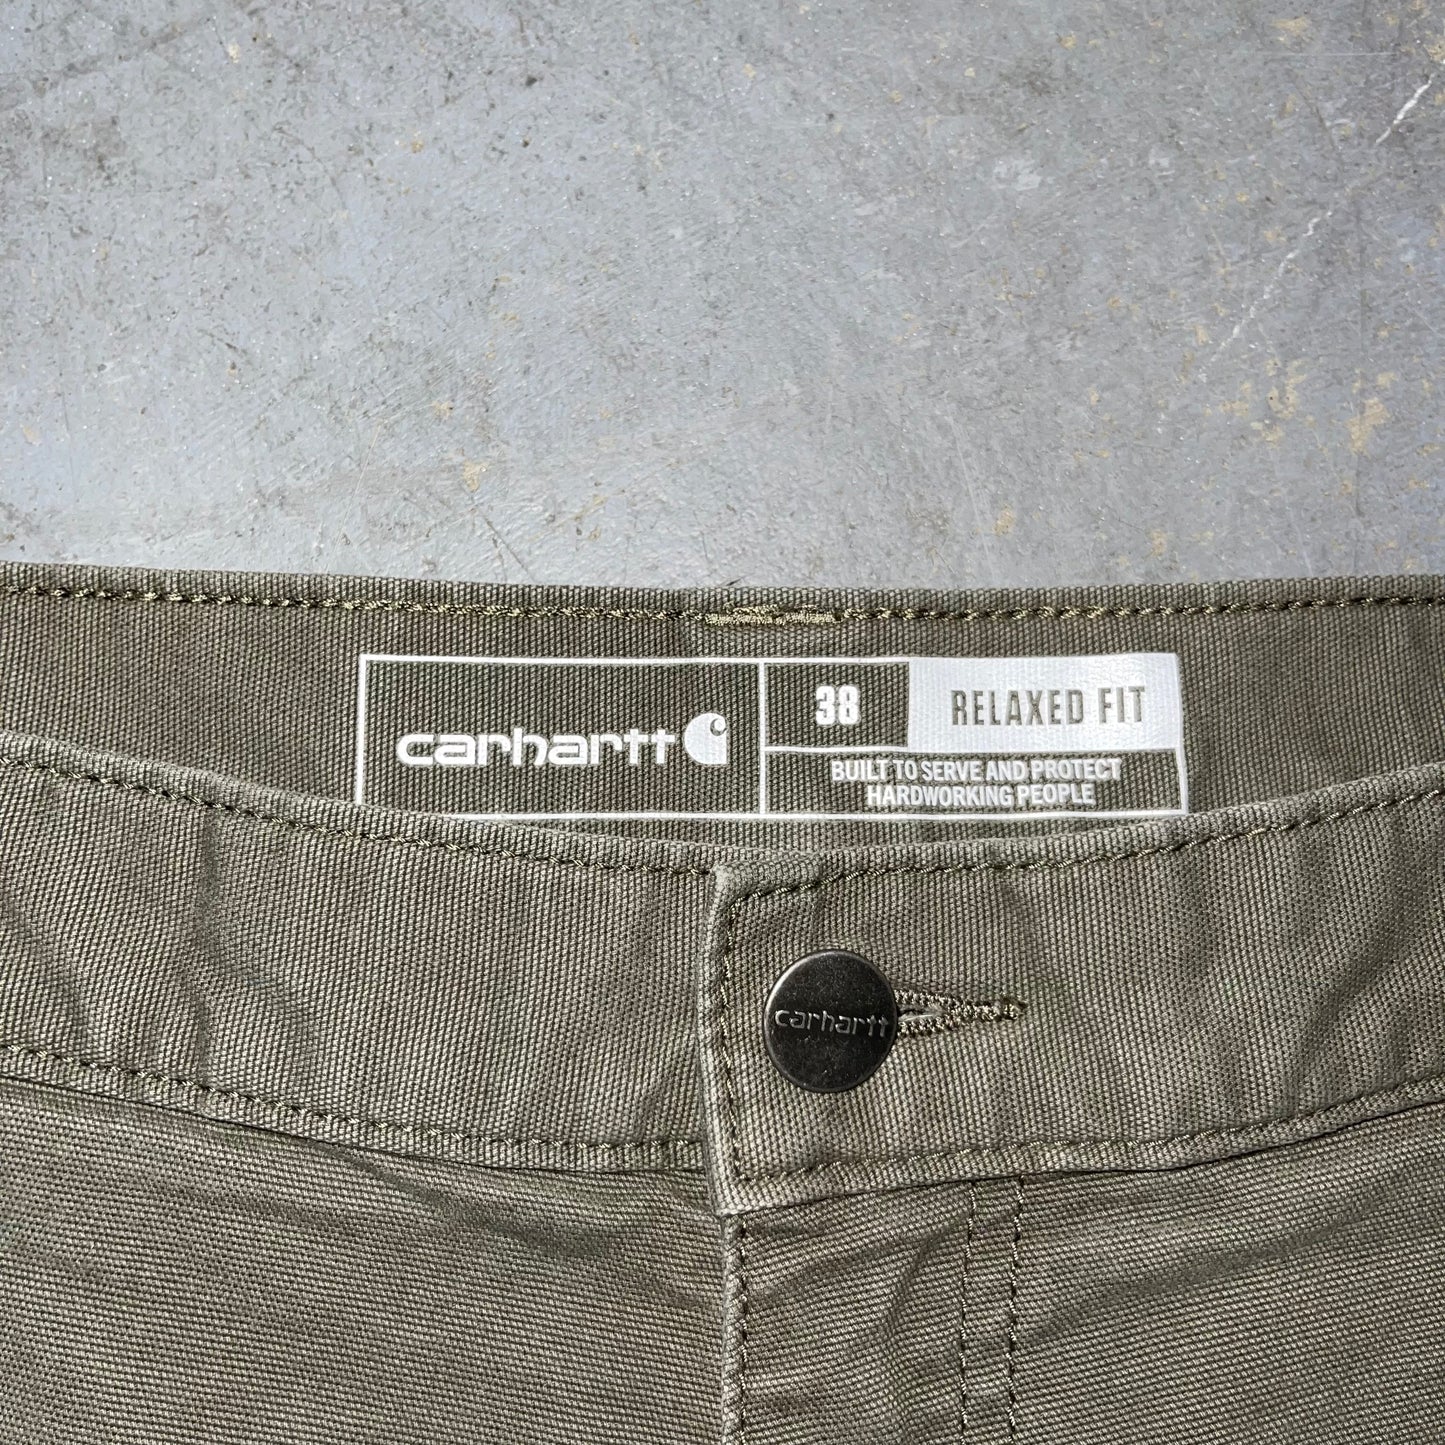 Carhartt Relaxed Fit Workwear Shorts. Size 38